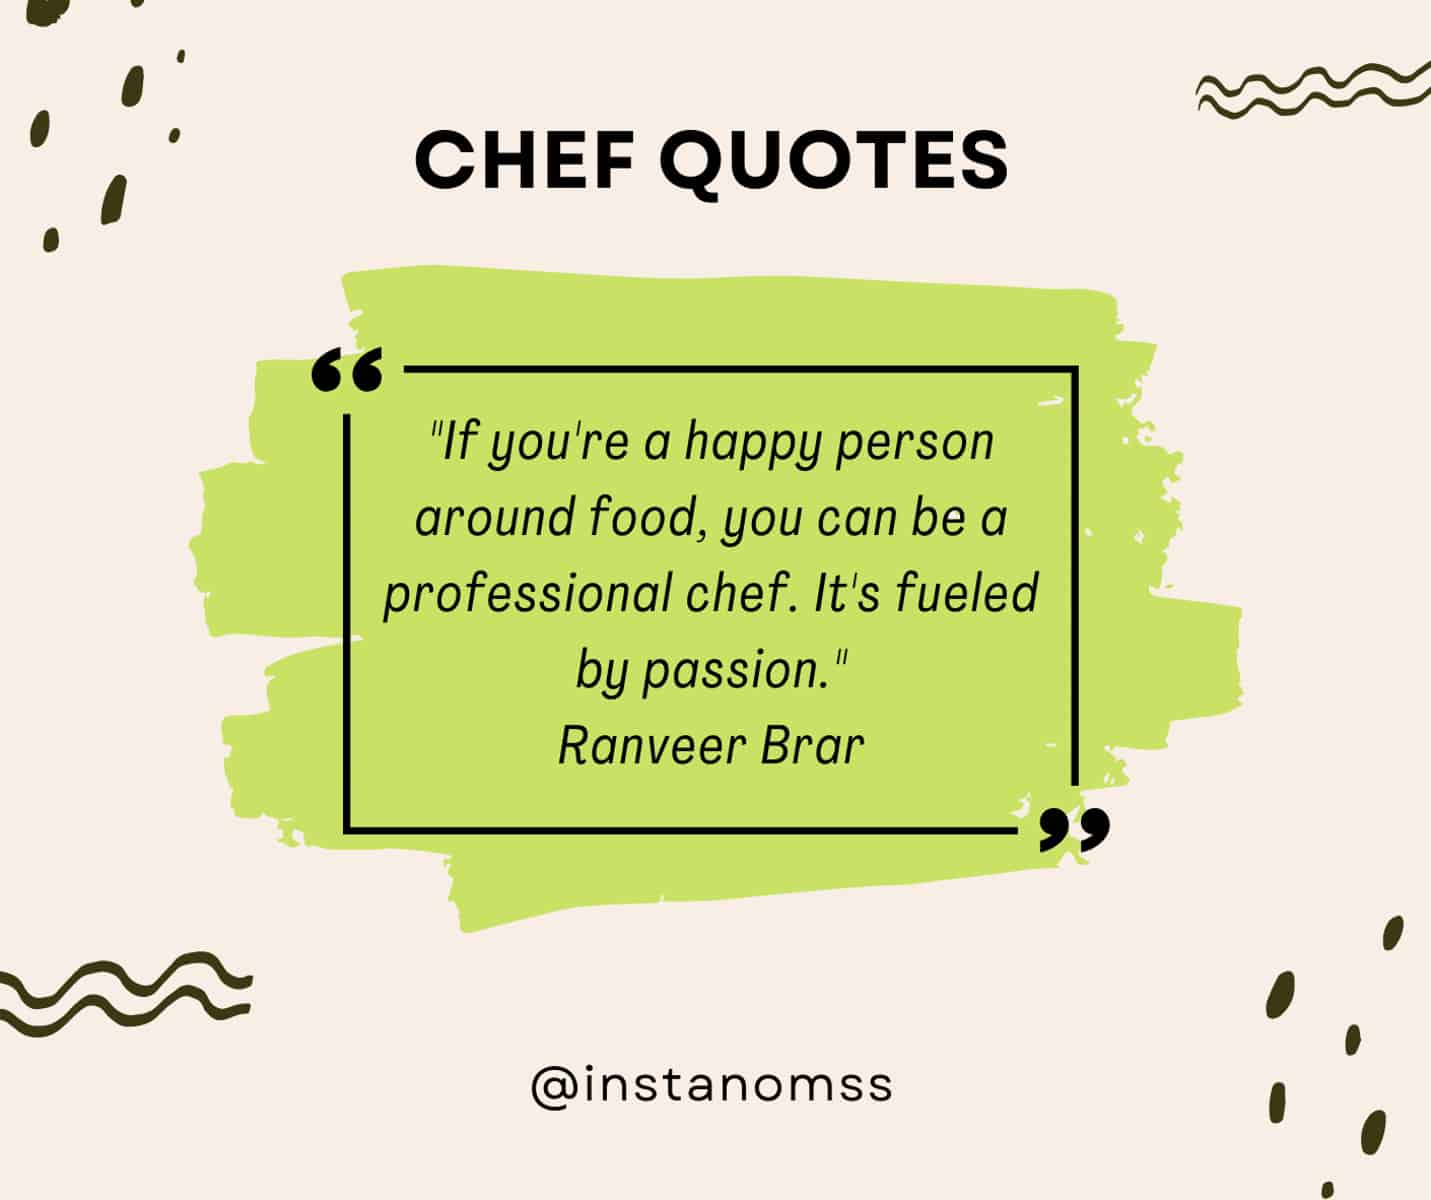 "If you're a happy person around food, you can be a professional chef. It's fueled by passion." Ranveer Brar